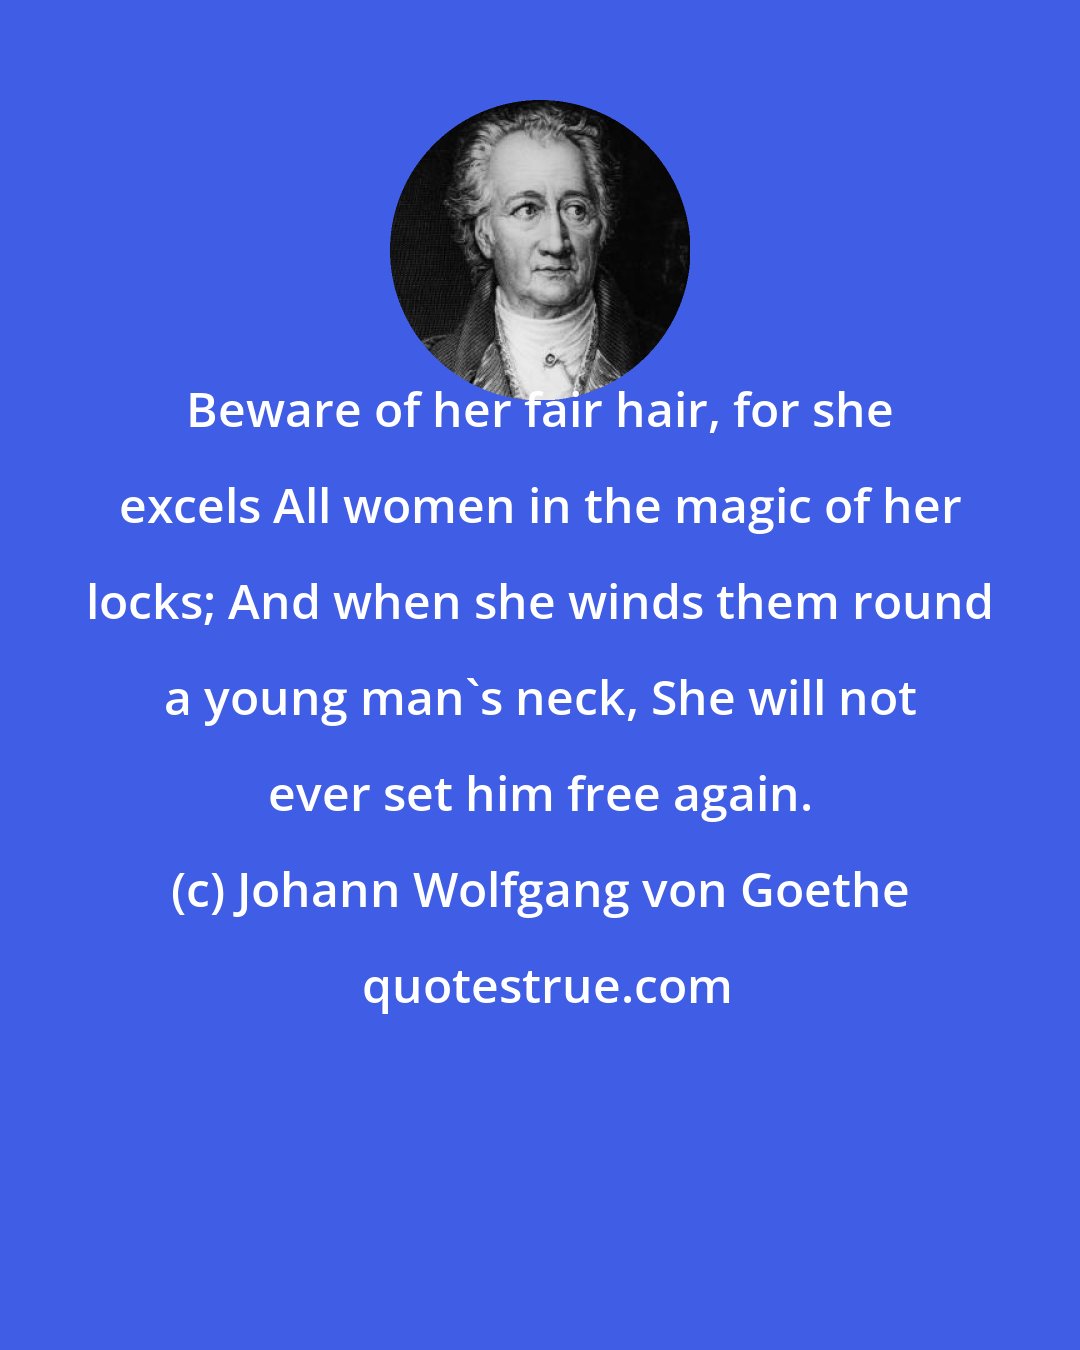 Johann Wolfgang von Goethe: Beware of her fair hair, for she excels All women in the magic of her locks; And when she winds them round a young man's neck, She will not ever set him free again.